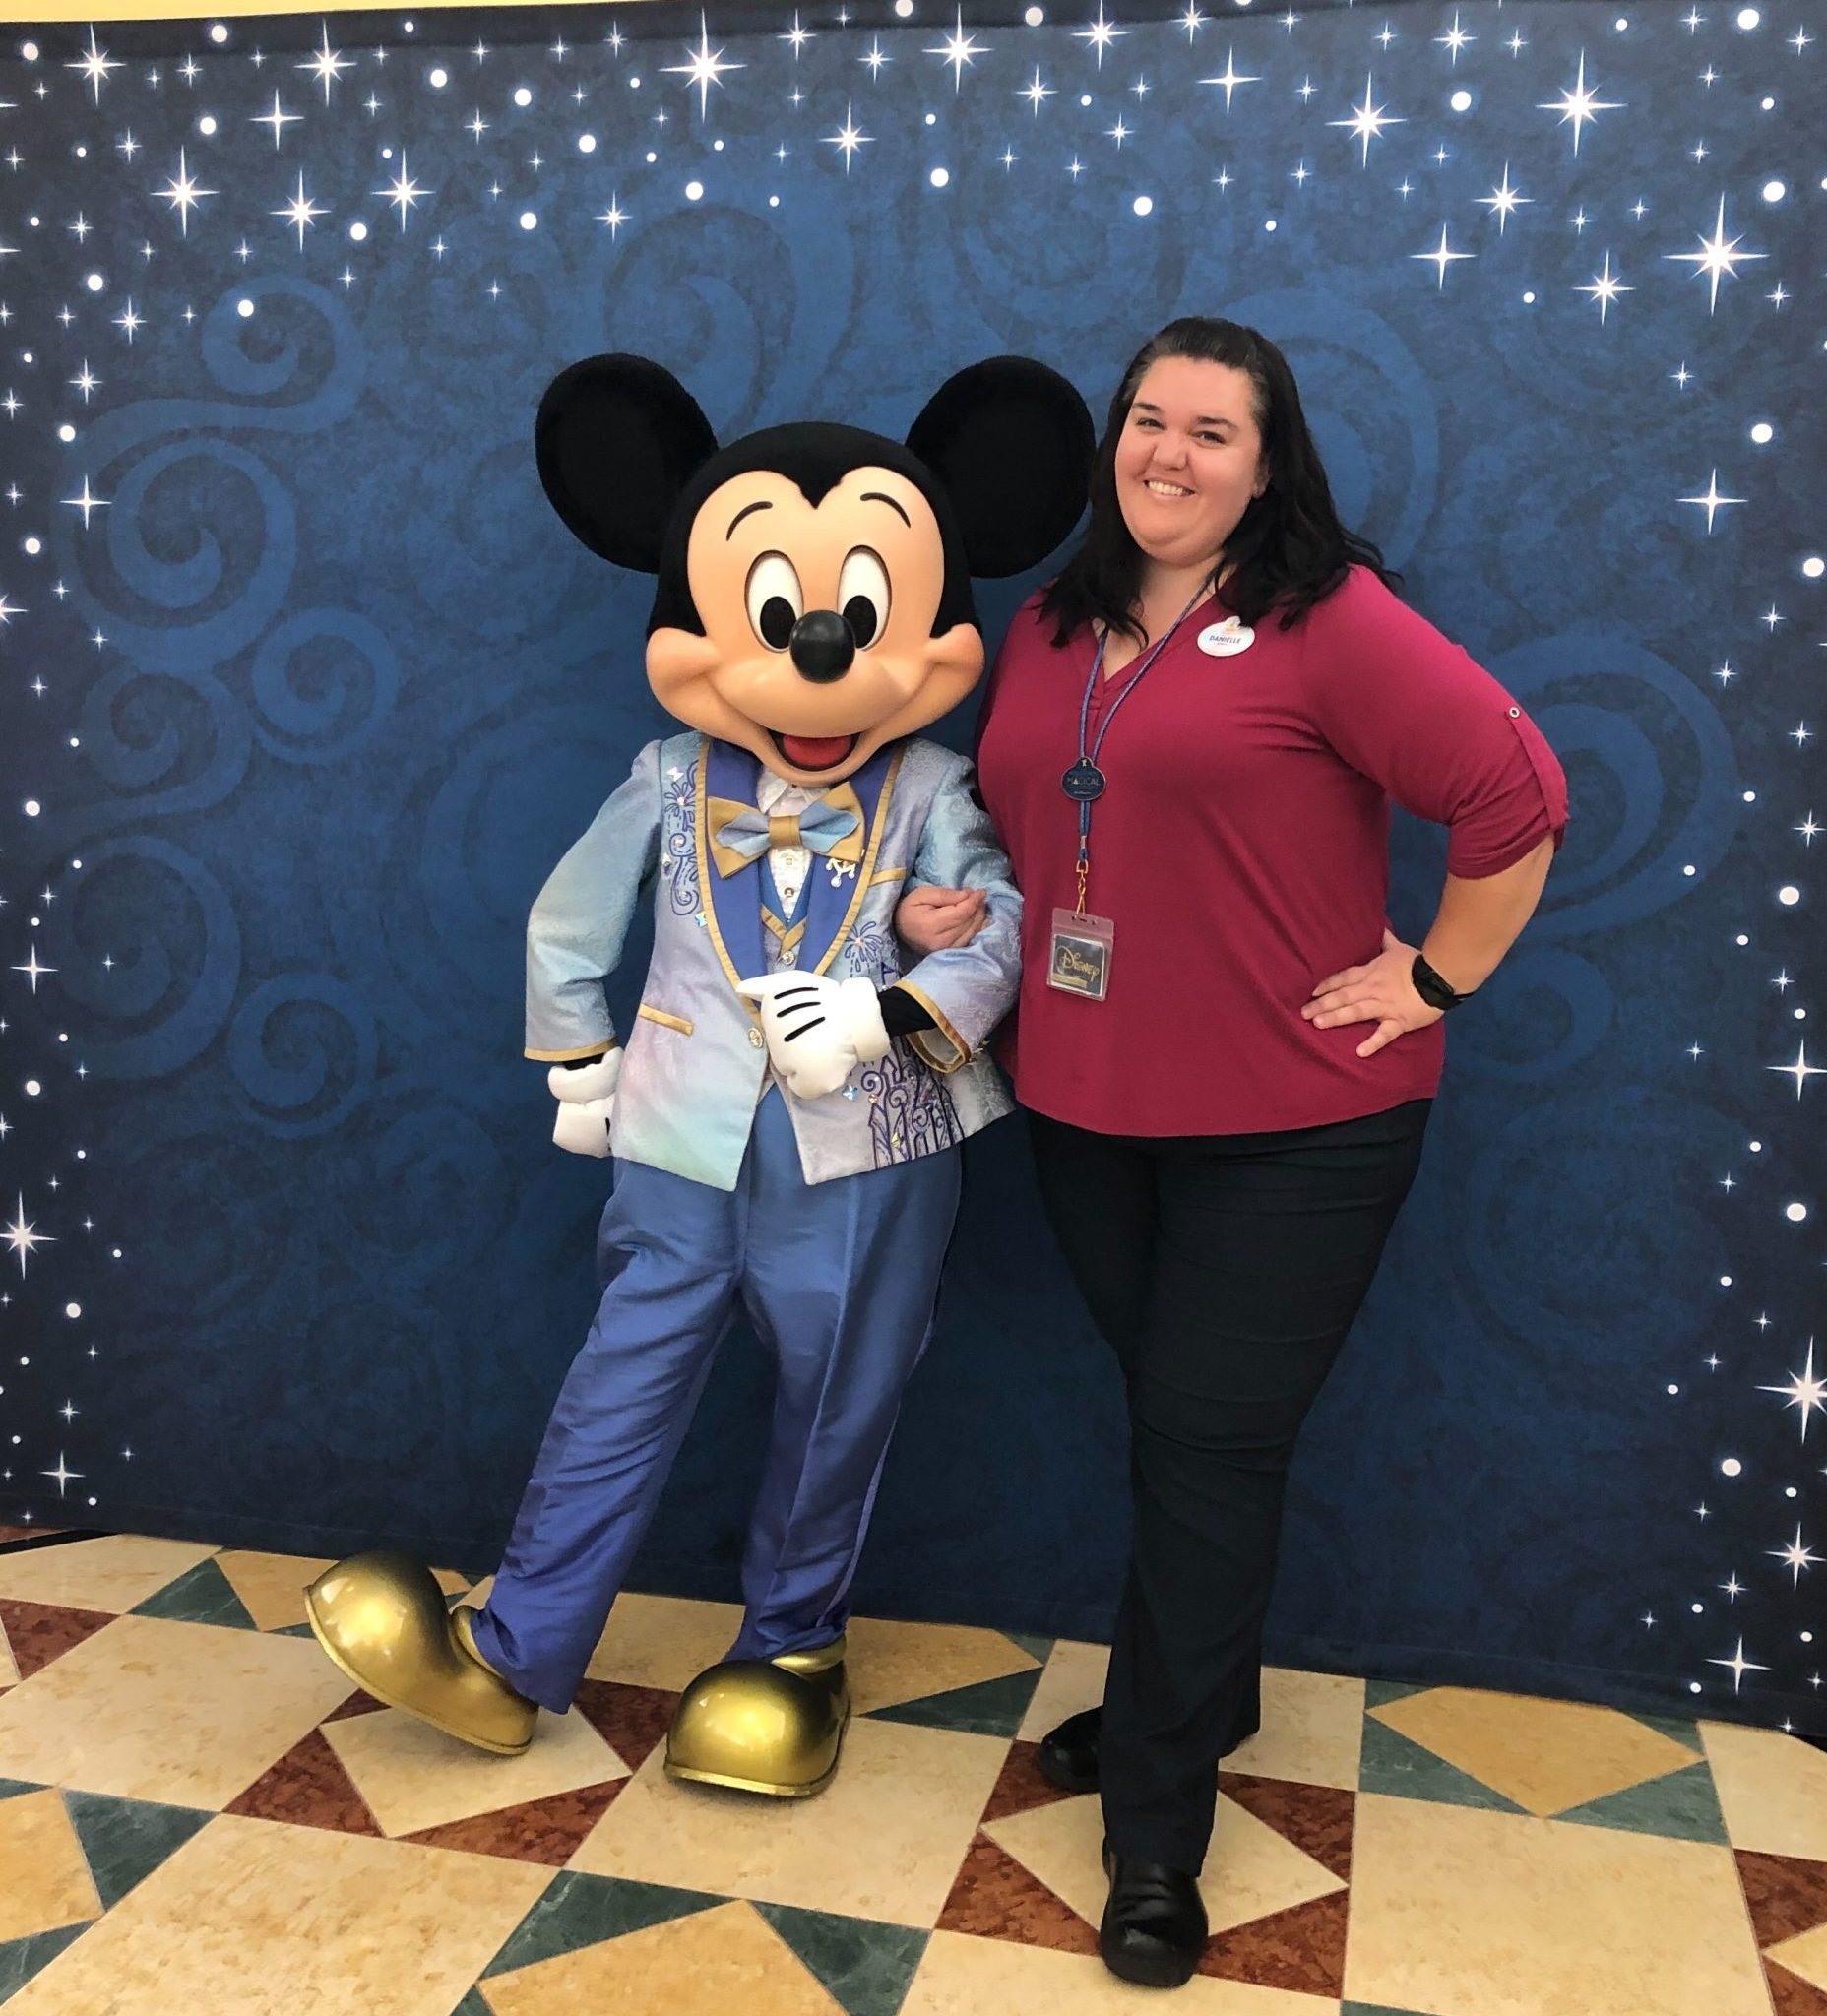 Disney DPEP Technology and Digital Employee Danielle wearing a red long sleeve shirt and smiling with Mickey Mouse